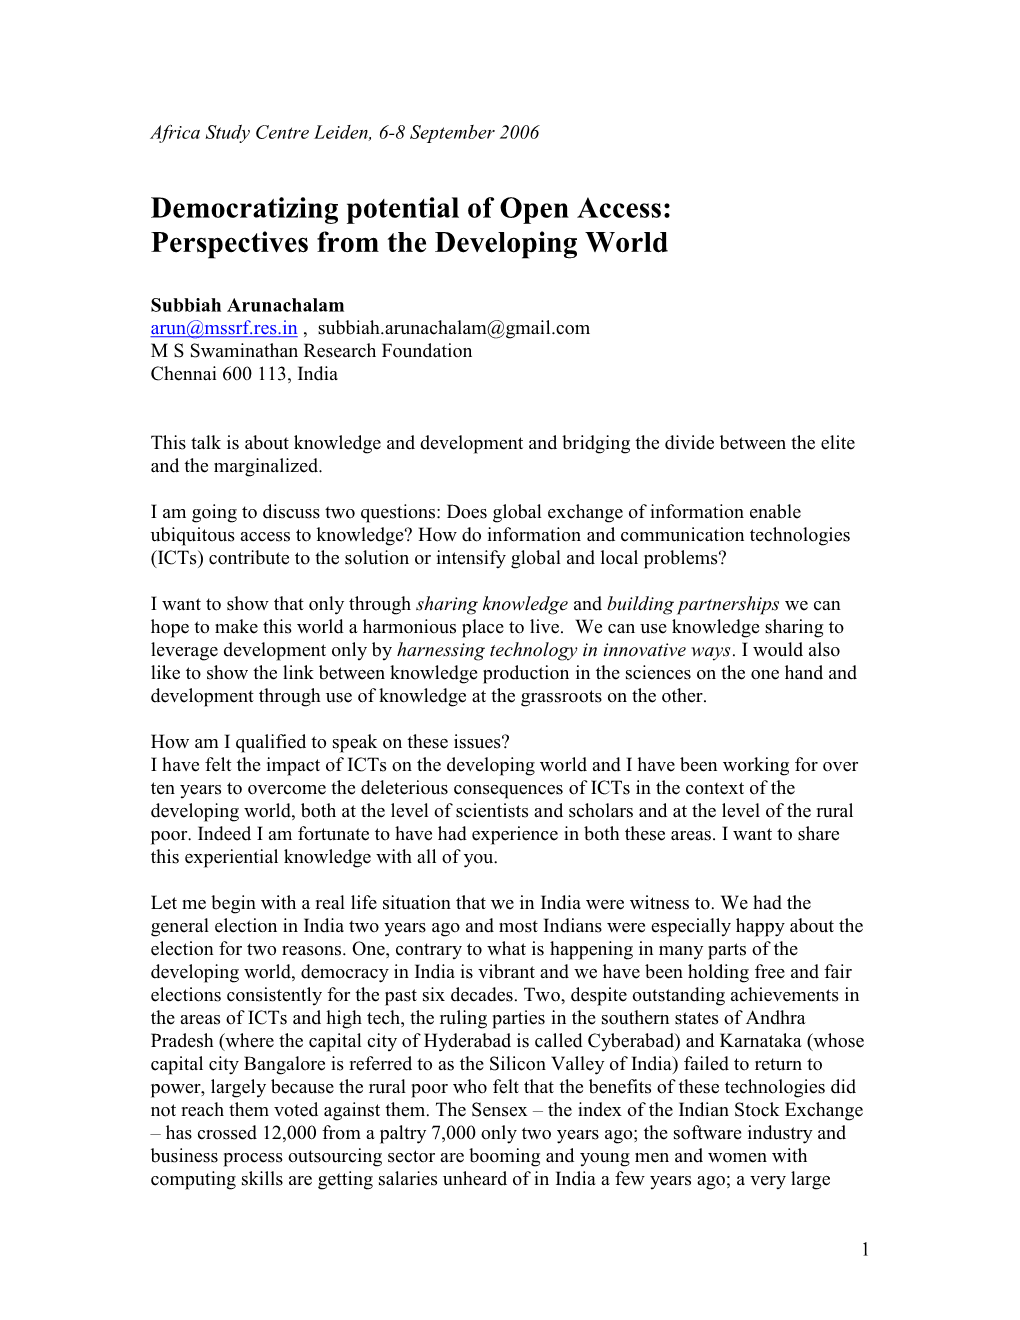 Democratizing Potential of Open Access: Perspectives from the Developing World